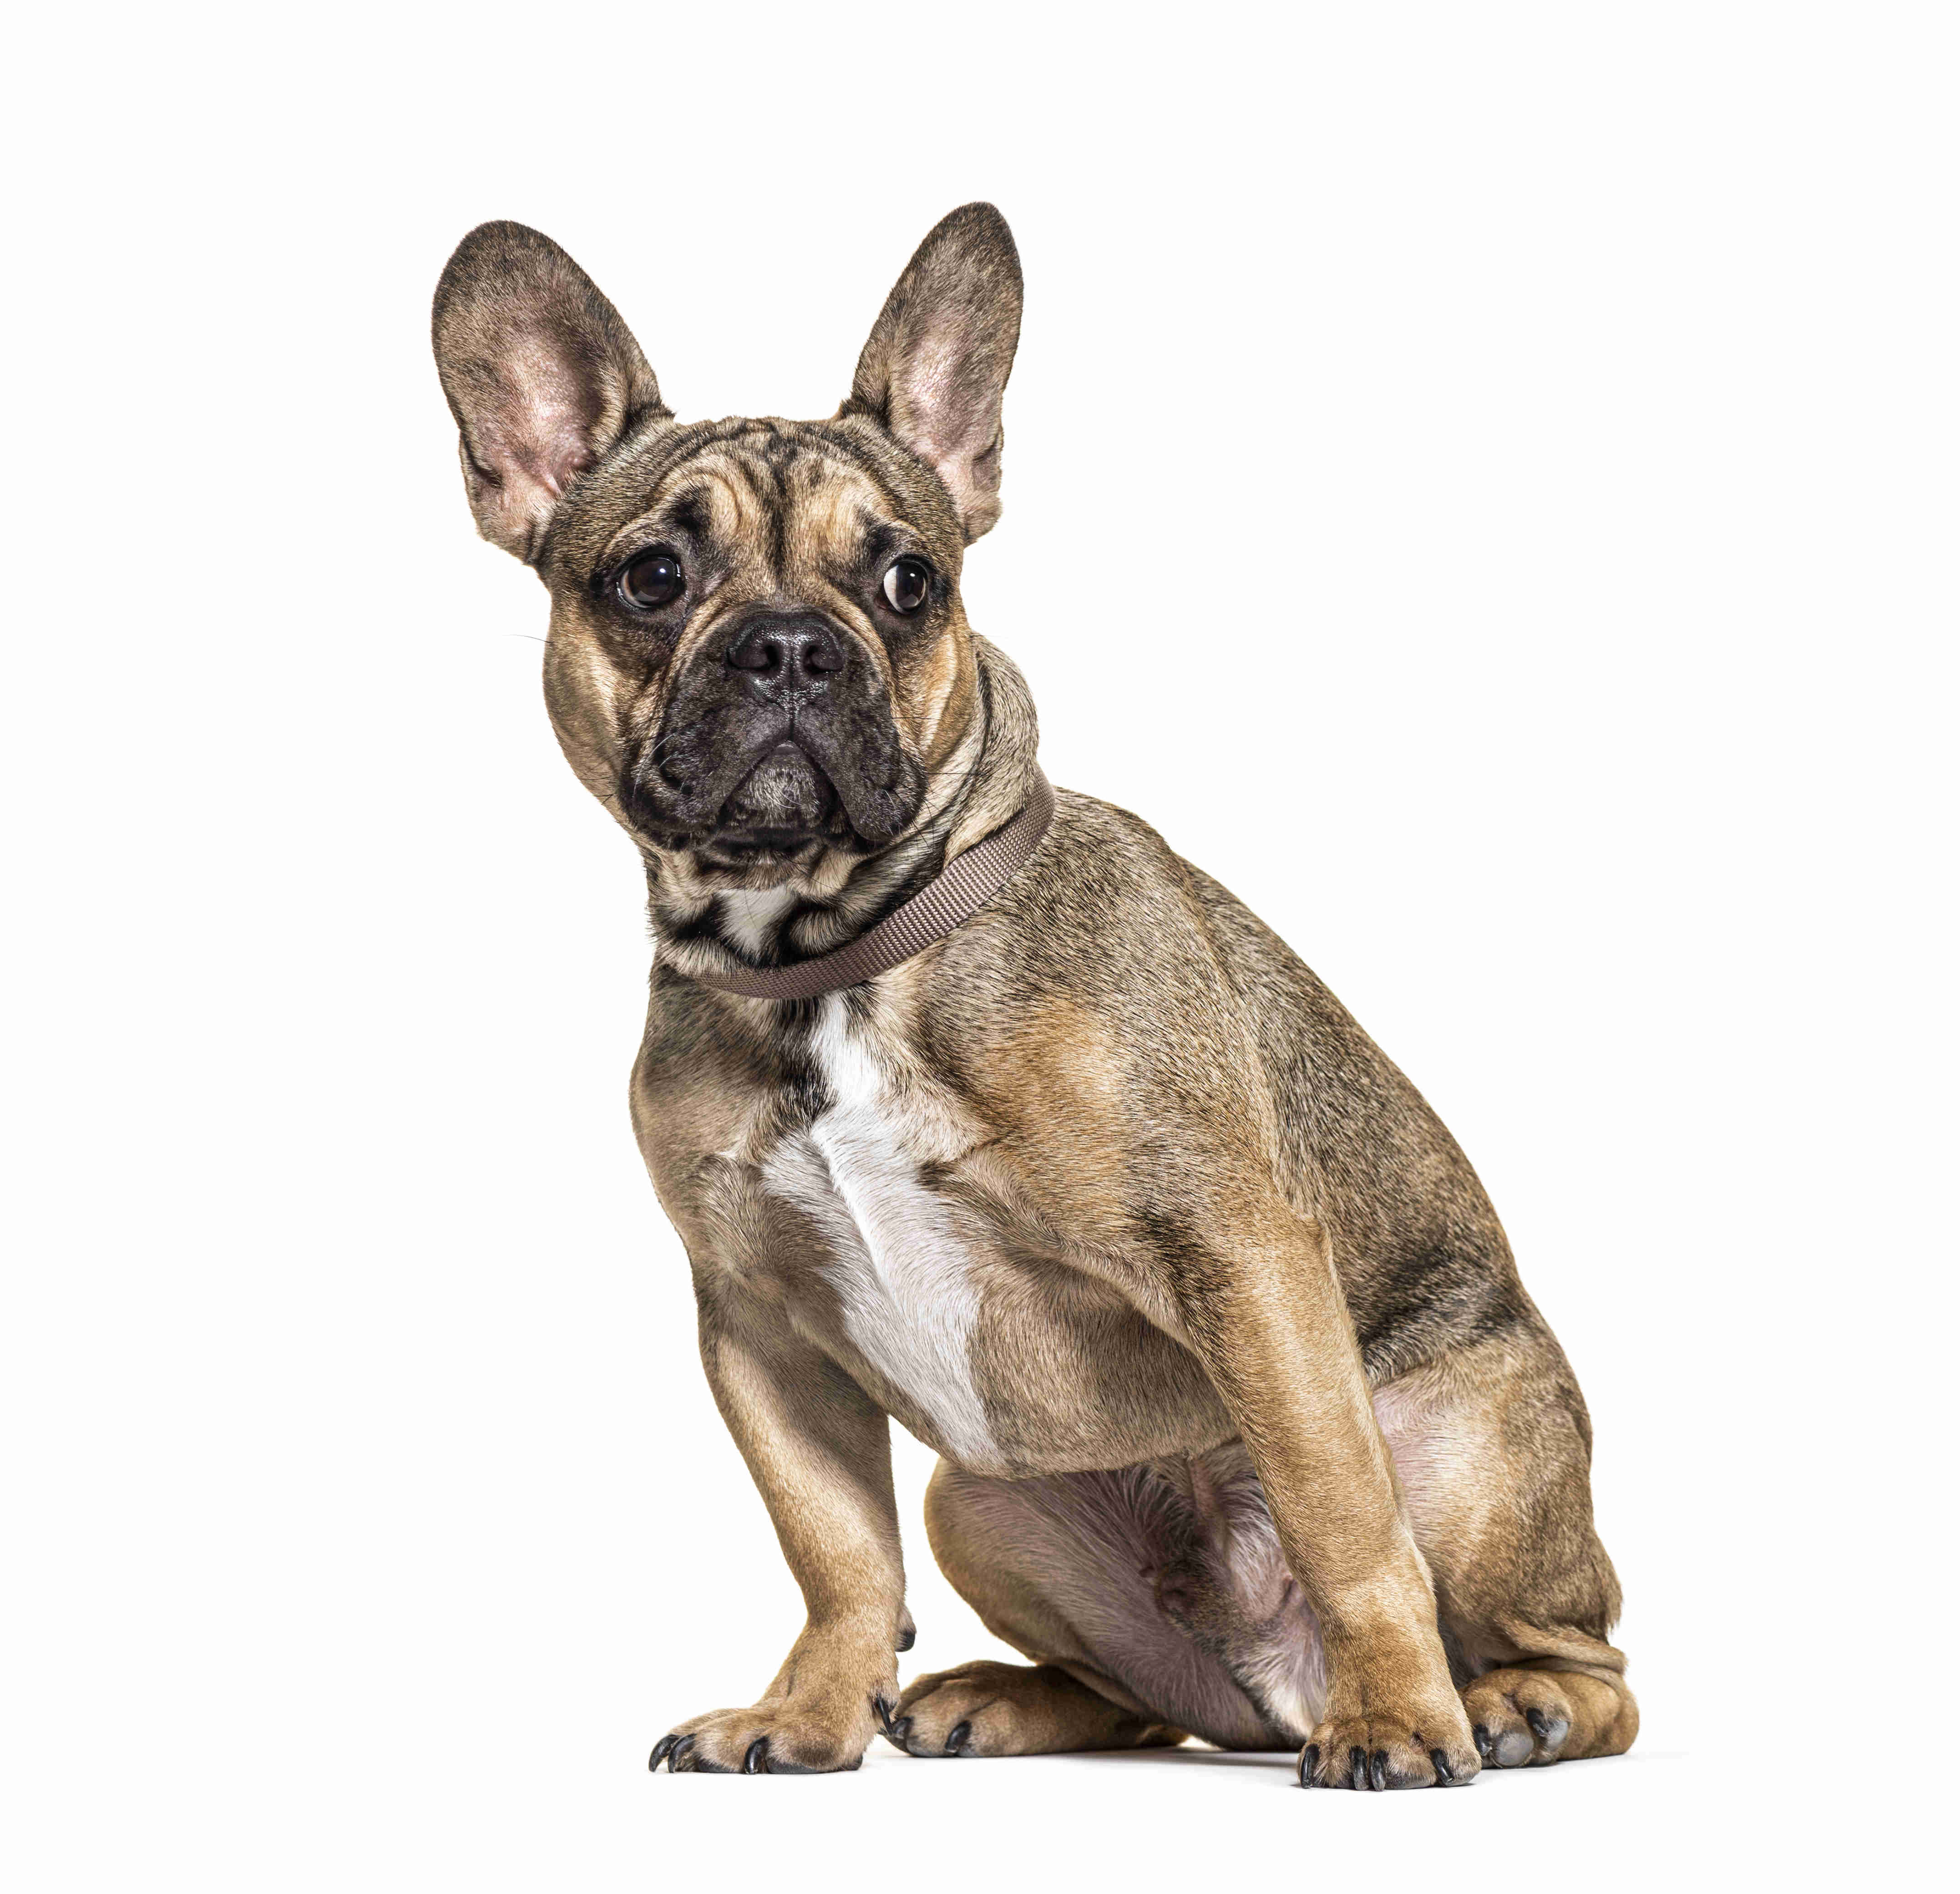 5 Effective Solutions to Help Your French Bulldog Respond to Training and Commands